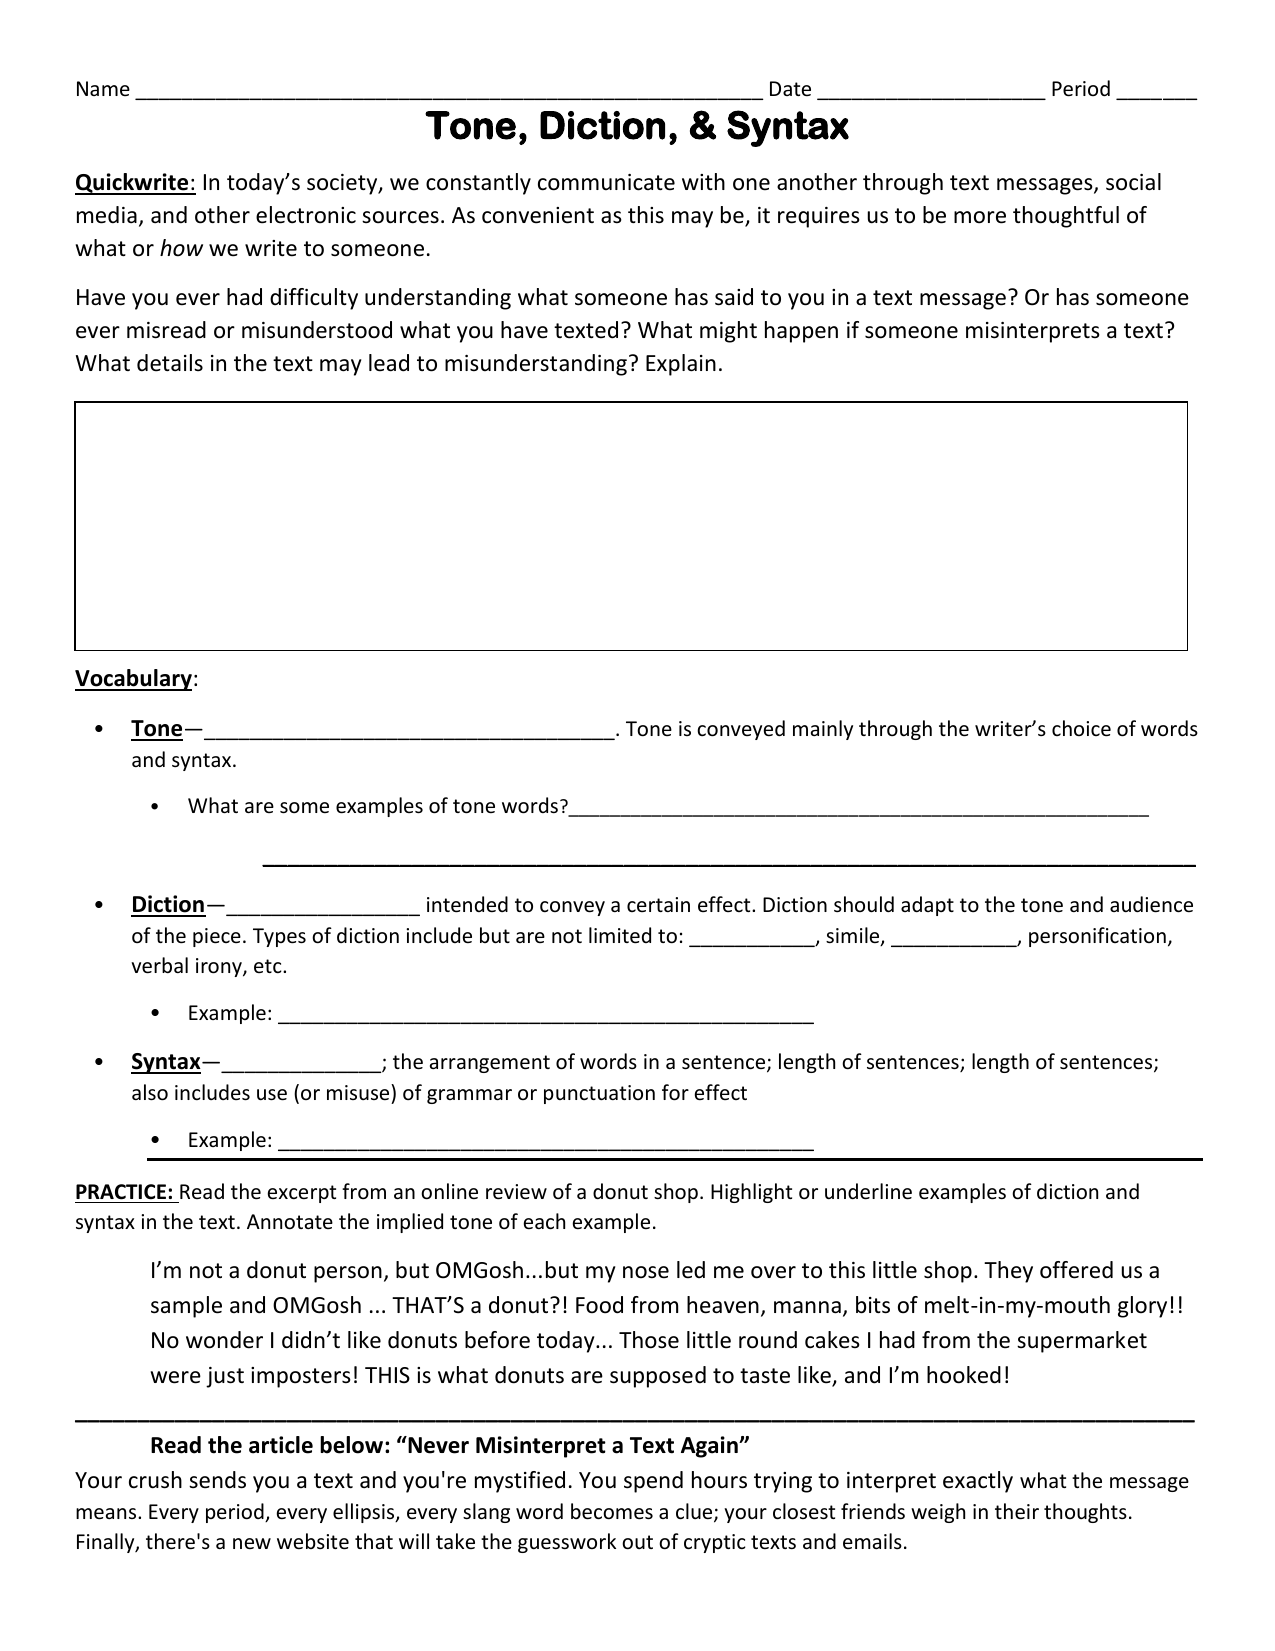 tone-diction-syntax-worksheet-s